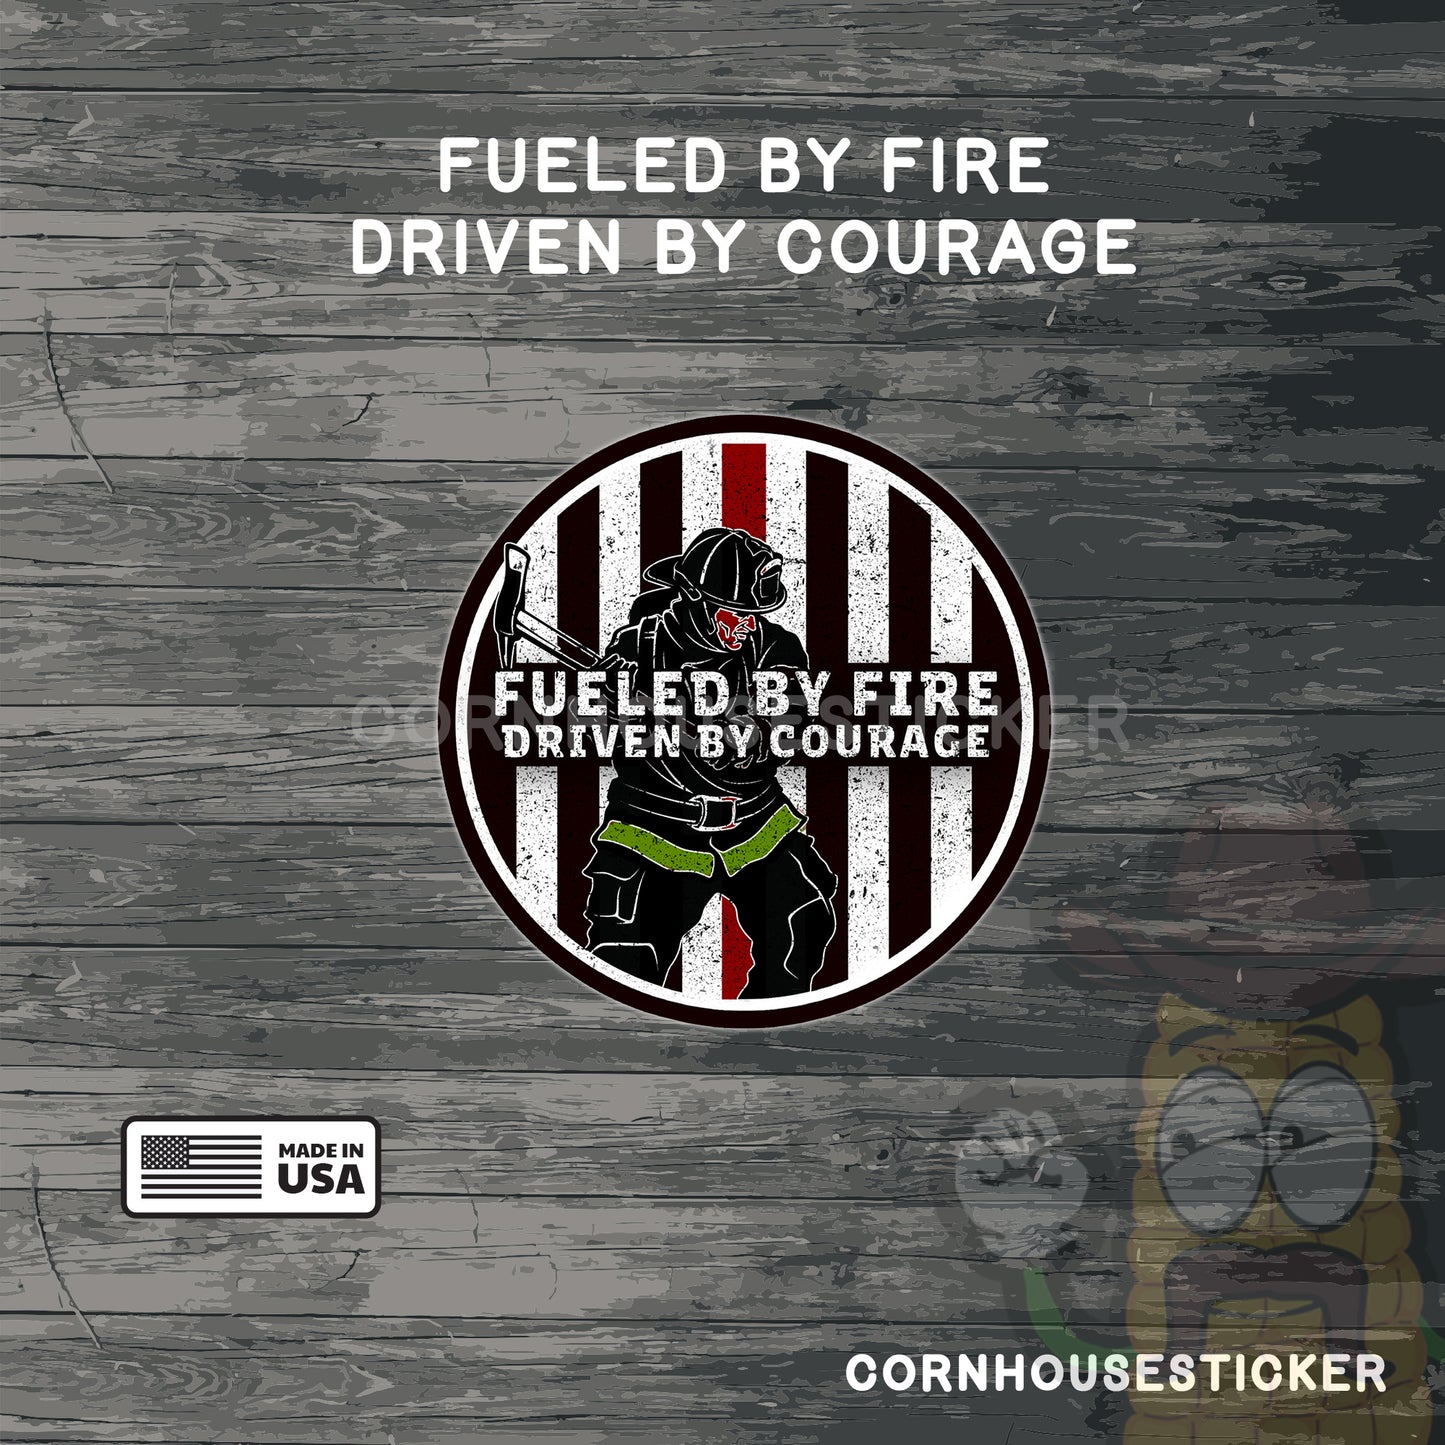 Fueled by fire driven by courage |Firefighter stickers